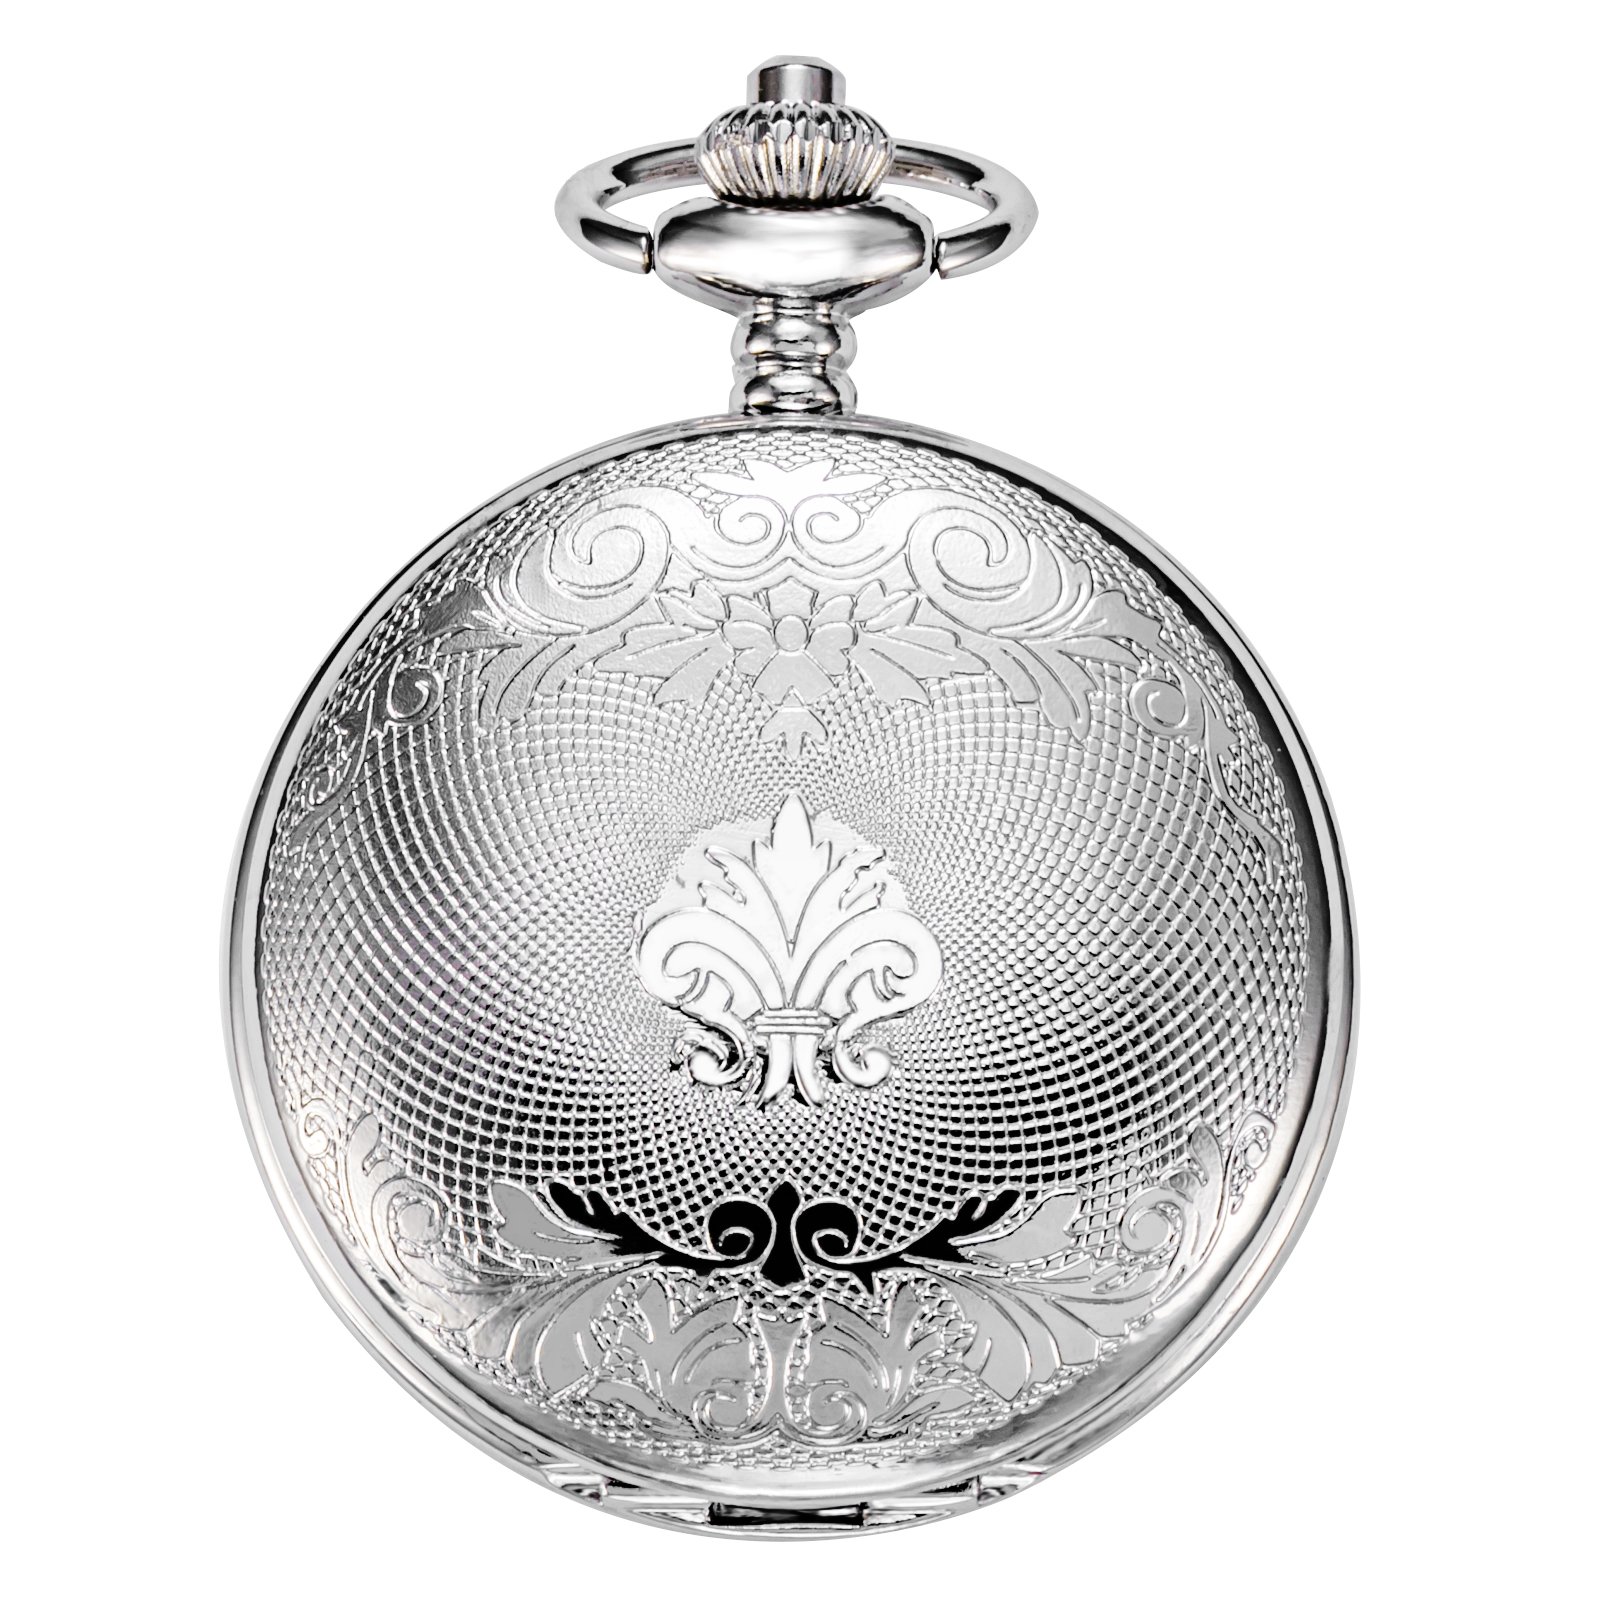 TREEWETO Antique Mens Pocket Watch Skeleton Mechanical Silver Double Case Roman Numerals Gift for Man